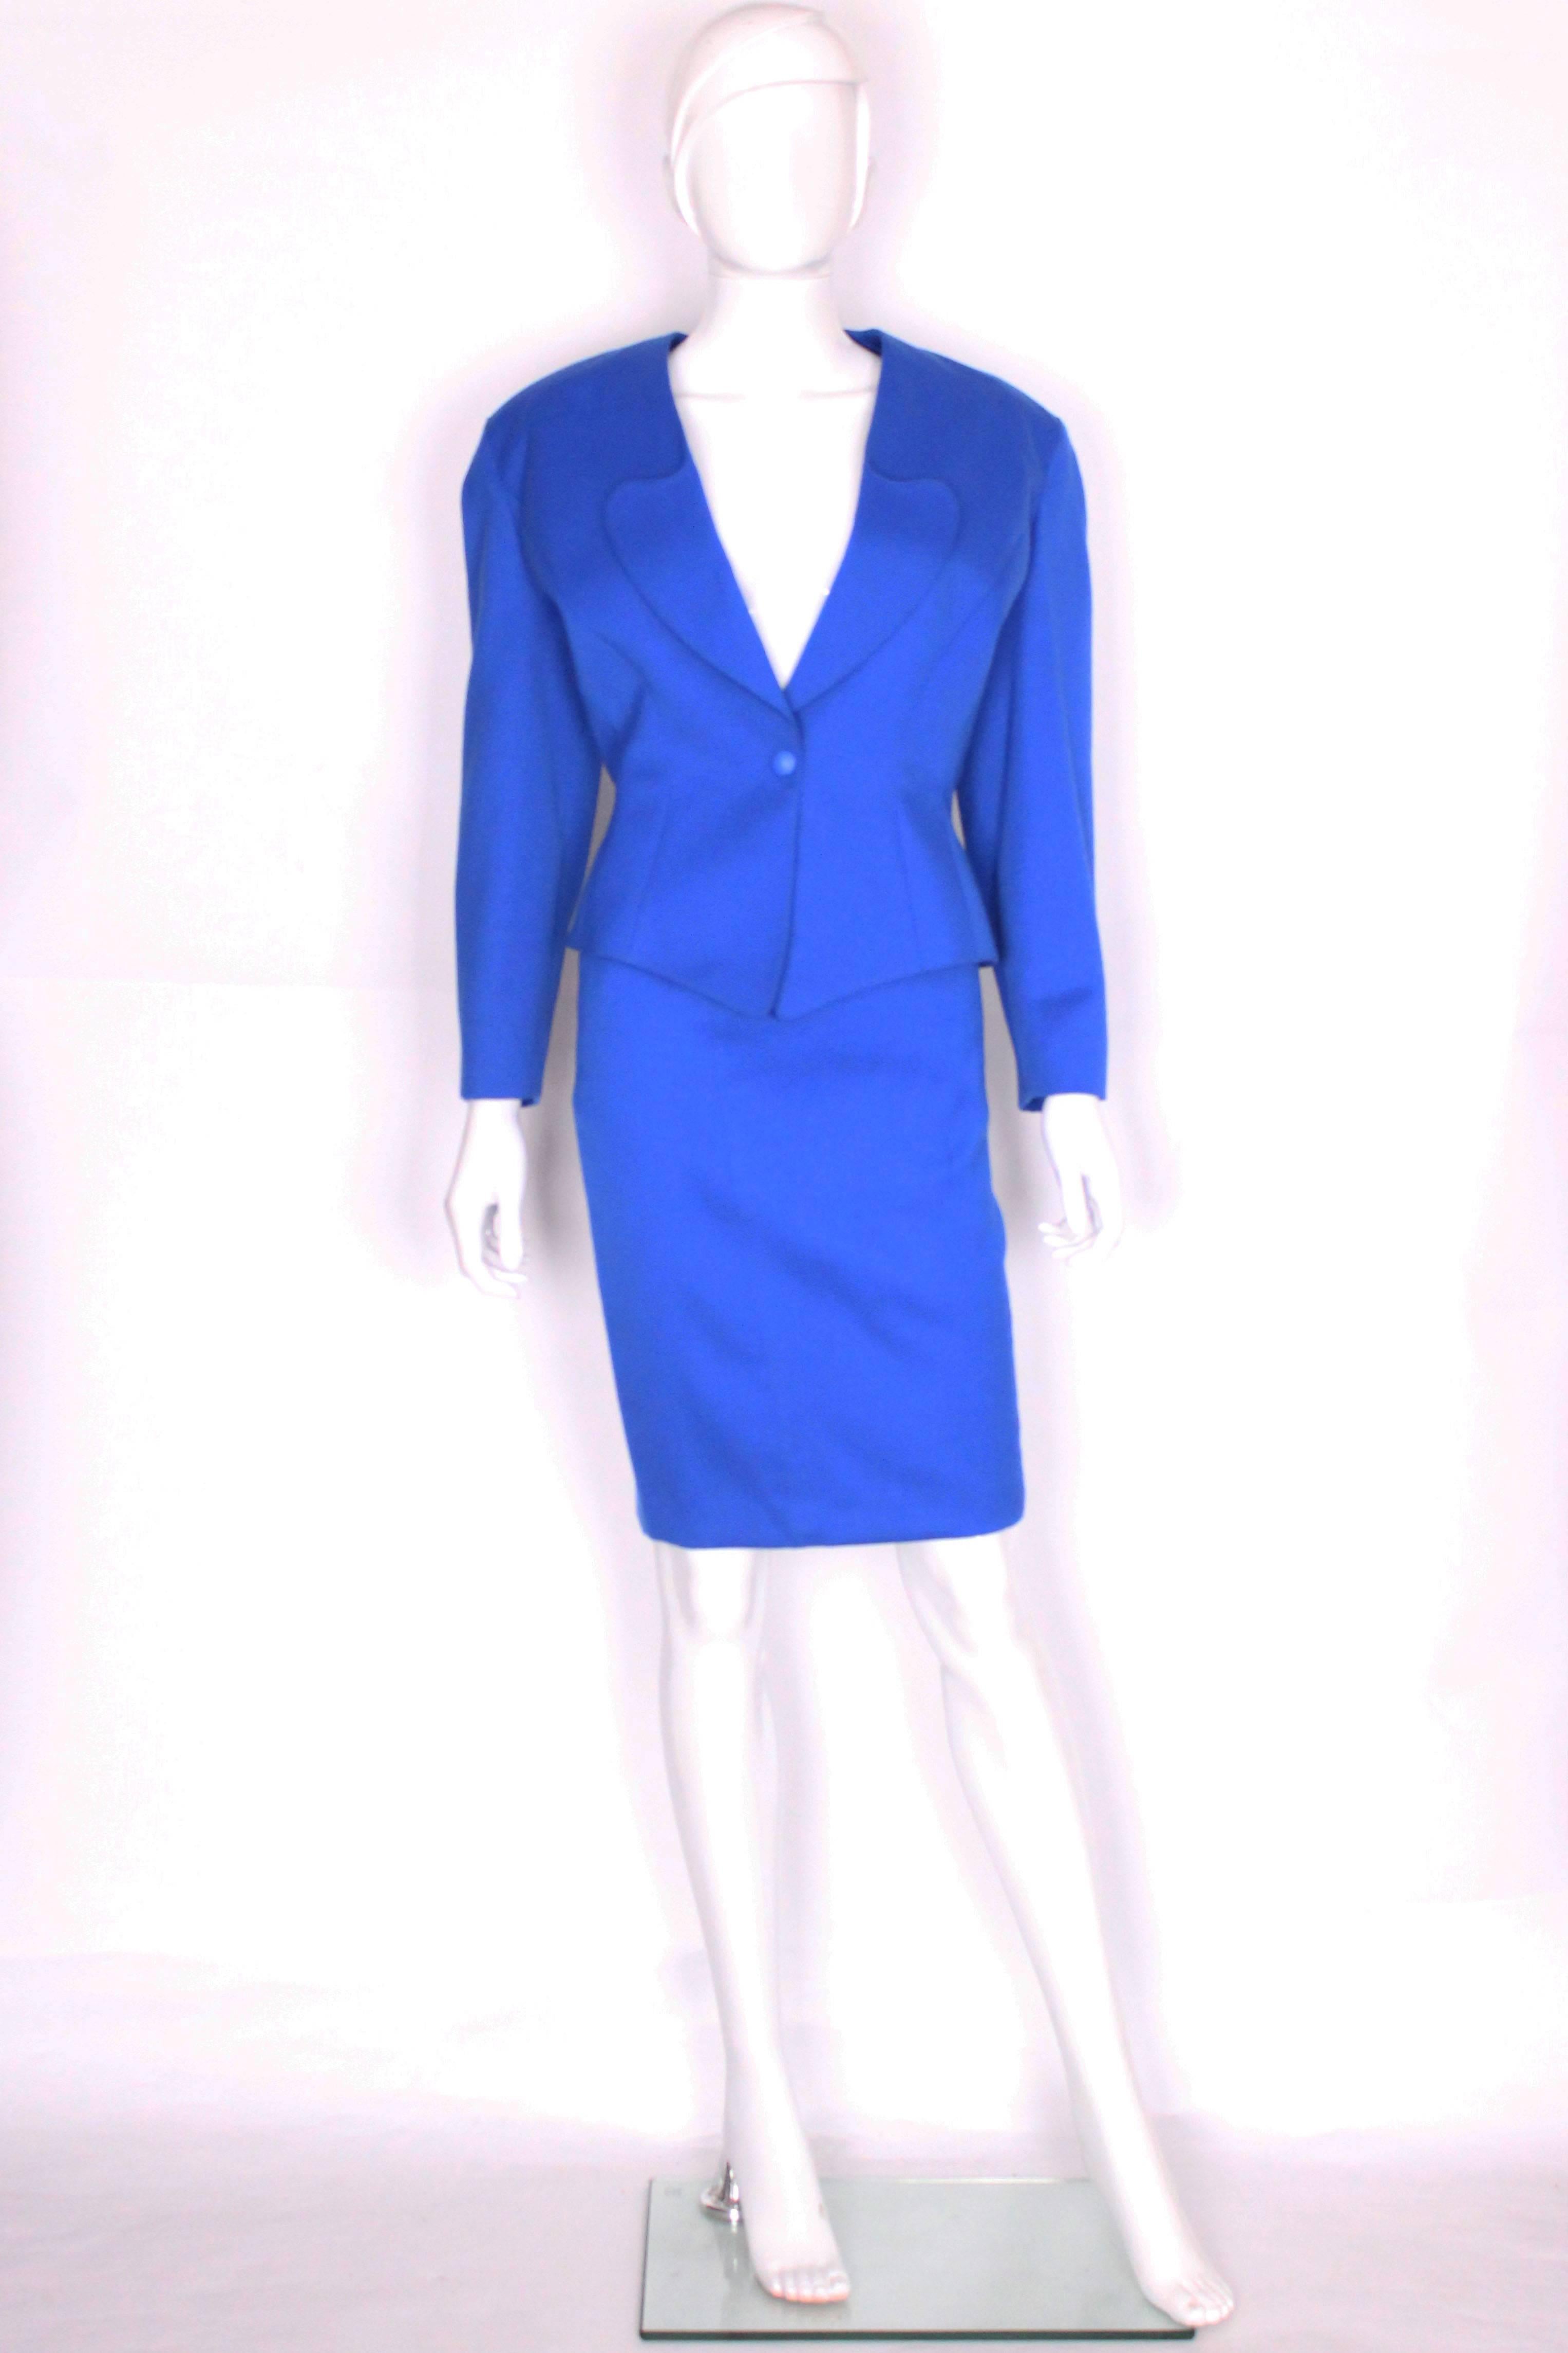 A great 'power suit' from the 1980s by Mugler par Thierry Mugler. In an electric blue wool, this suit comprises a pencil skirt and matching jacket The jacket has a v neckline and lower lapels,  and wonderful tailoring. It fastens with a single